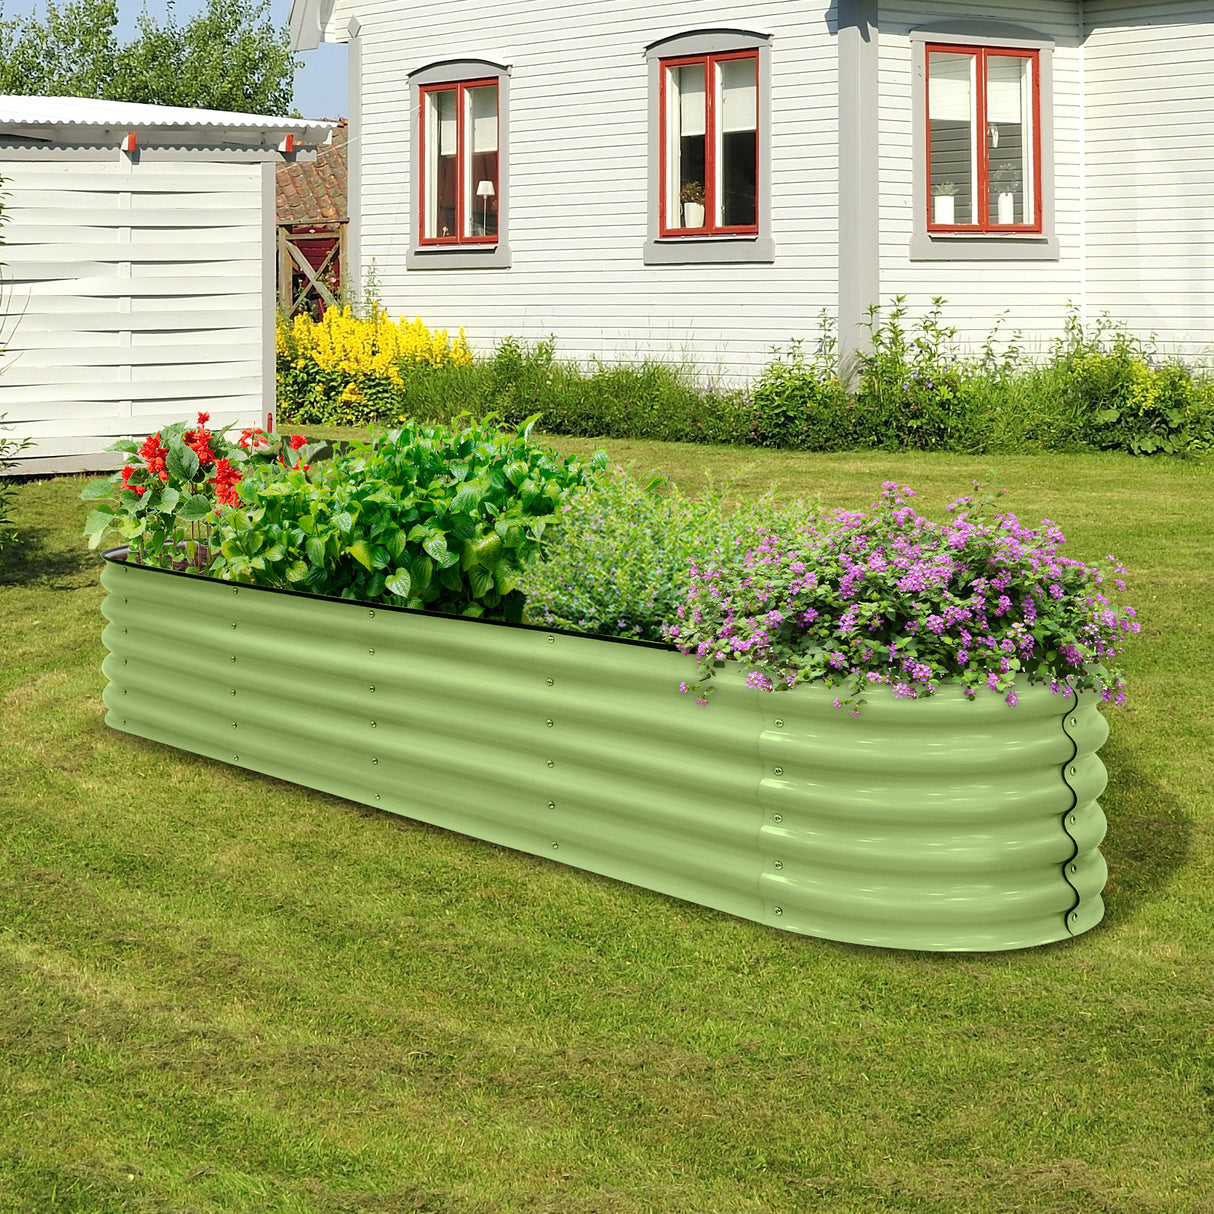 EAGLE PEAK 17’’ Tall 9 in 1 Elevated Raised Garden Bed